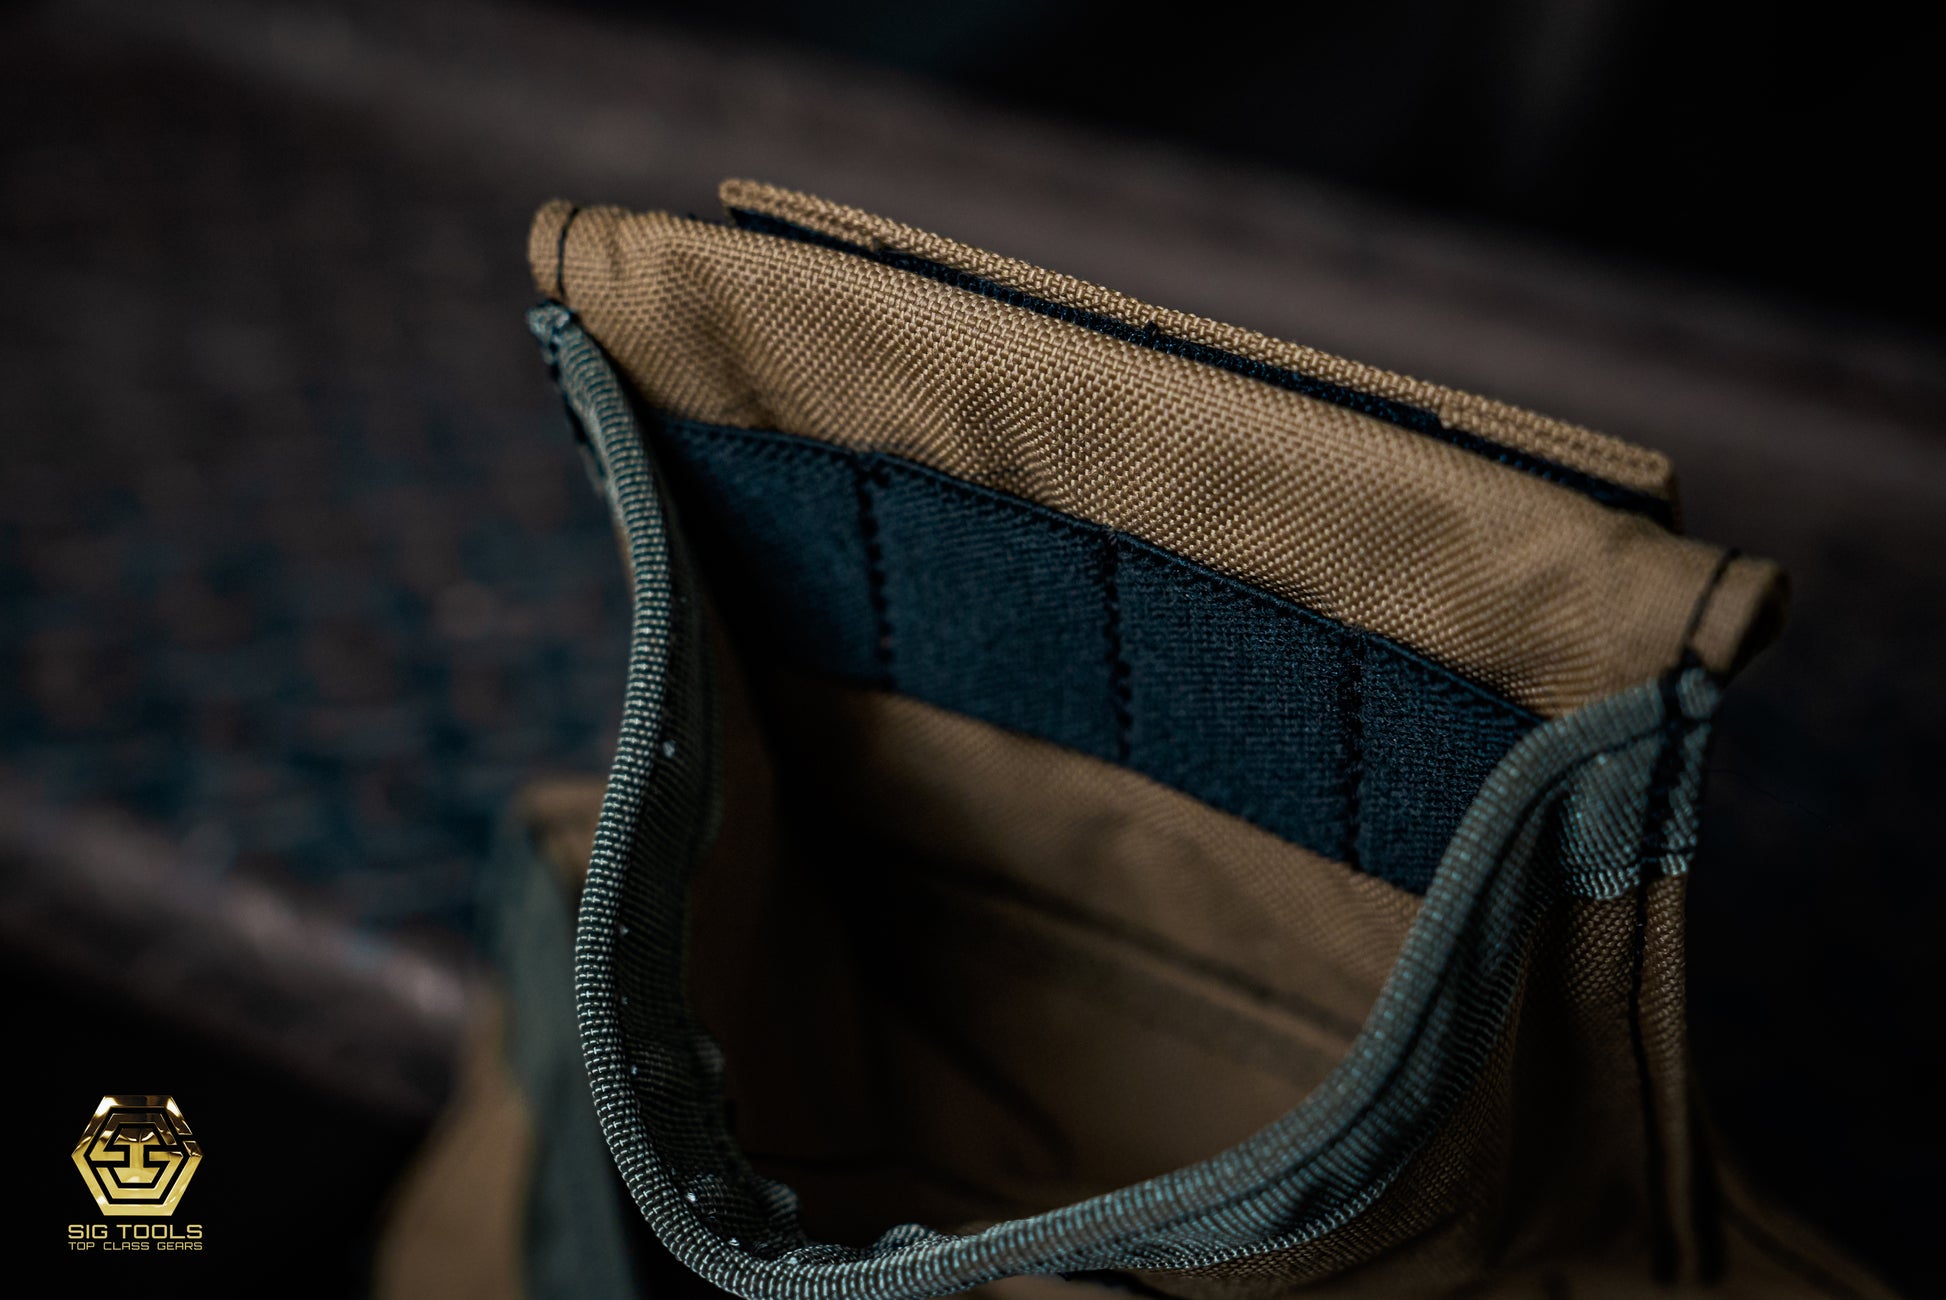 A close-up view of the Bit Index pocket on the Sawdust Sage Carpenter Fastener Bag by Badger, highlighting its practicality for organising and accessing various bits and fasteners.